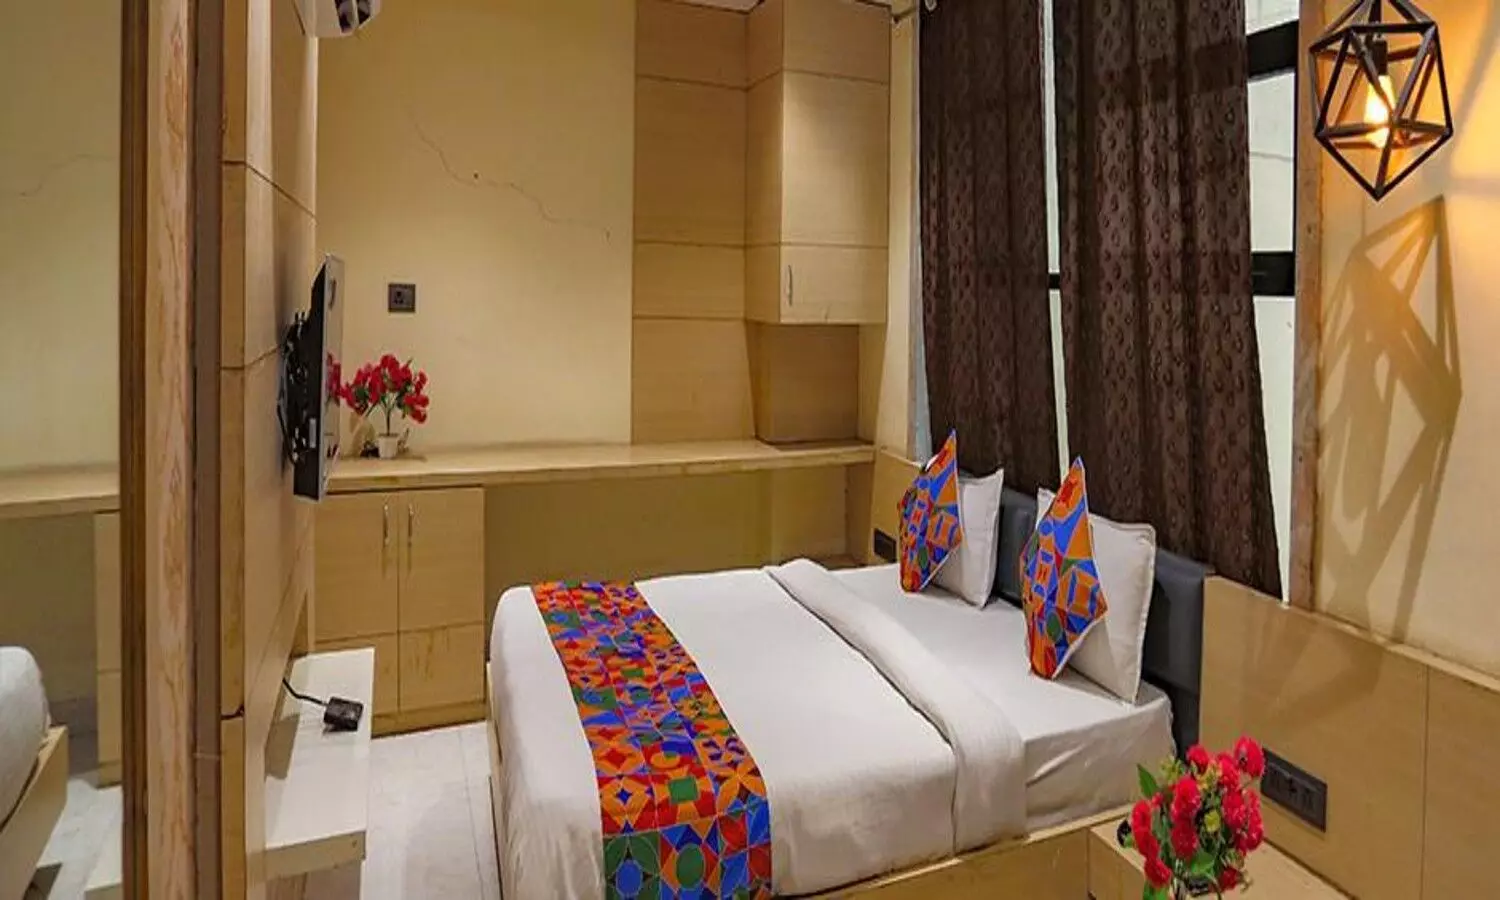 safe hotels for unmarried couples in bhopal